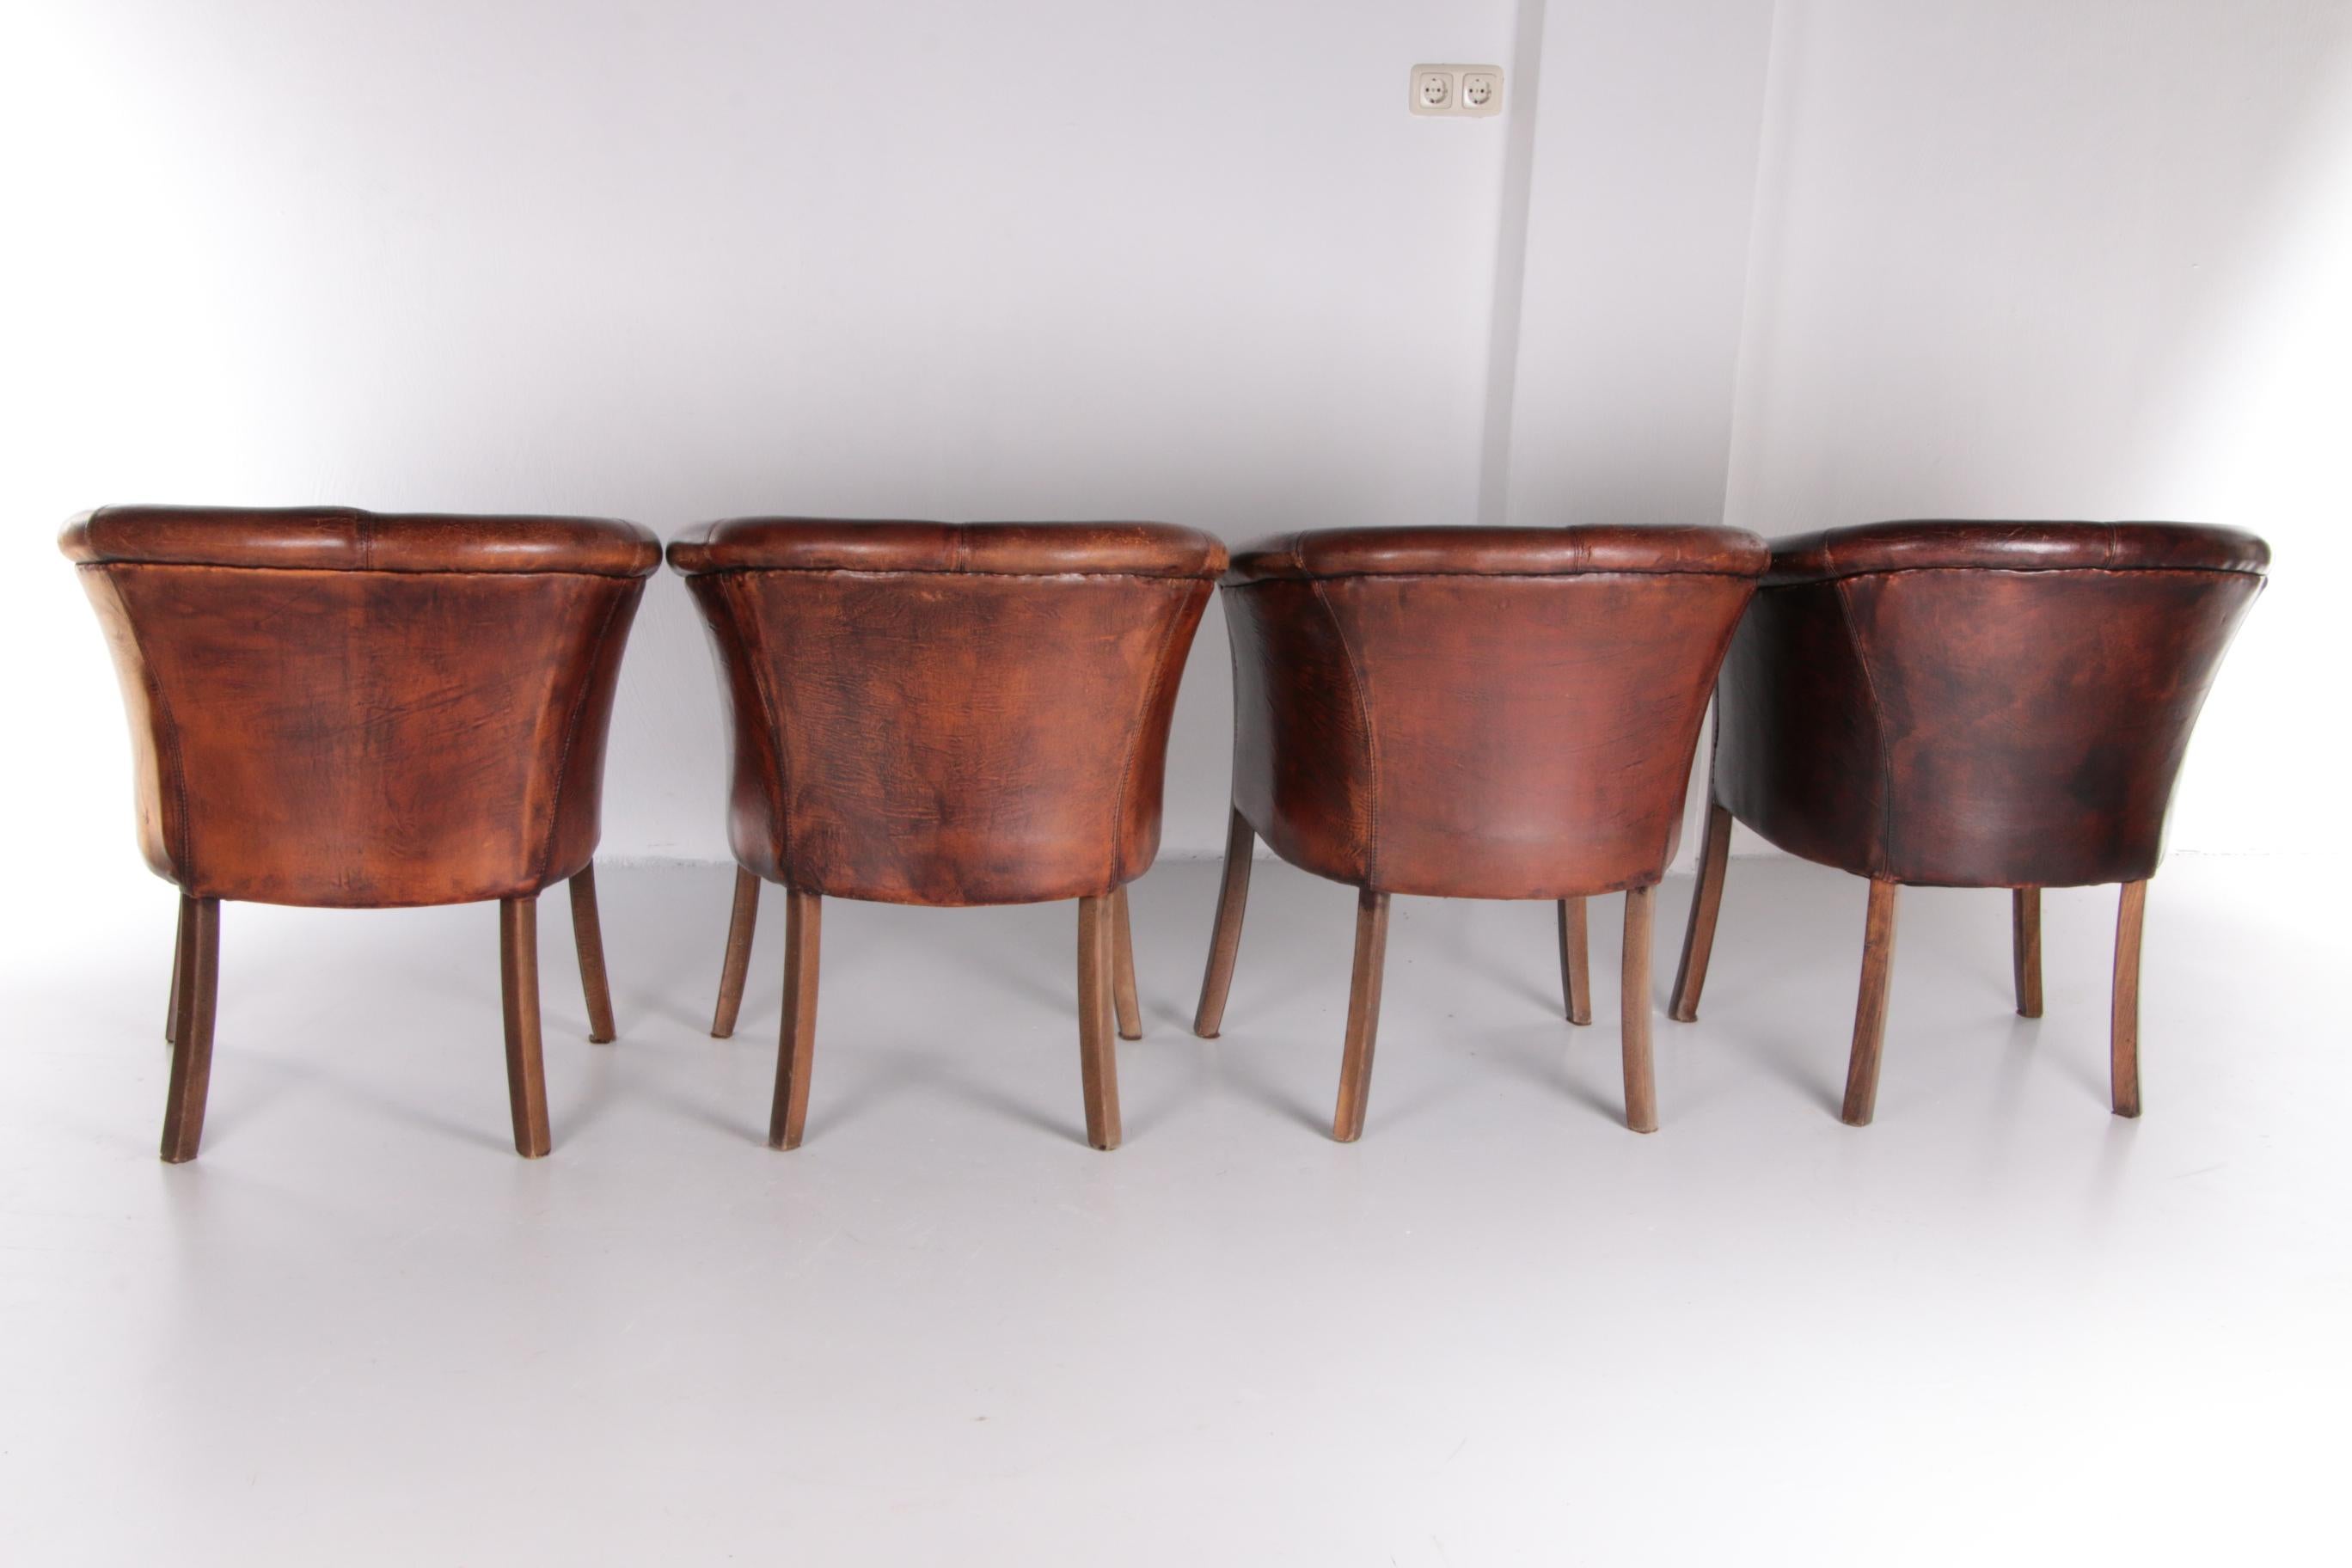 Late 20th Century Set of 4 Sheep Leather Dining Table Chairs, 1970, Netherlands